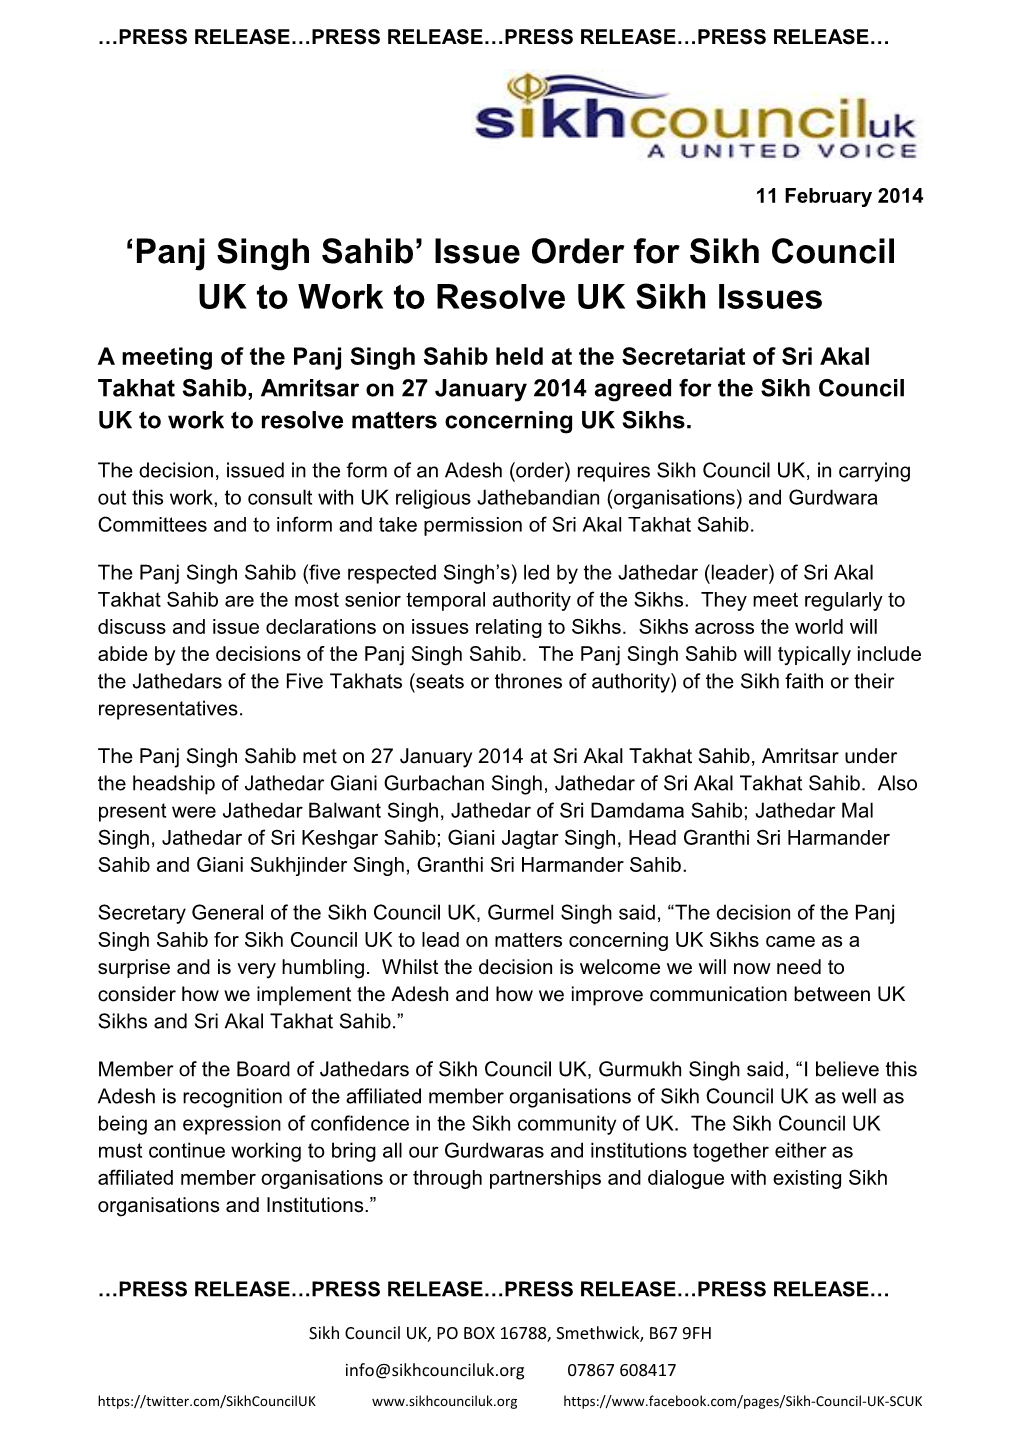 Panj Singh Sahib’ Issue Order for Sikh Council UK to Work to Resolve UK Sikh Issues